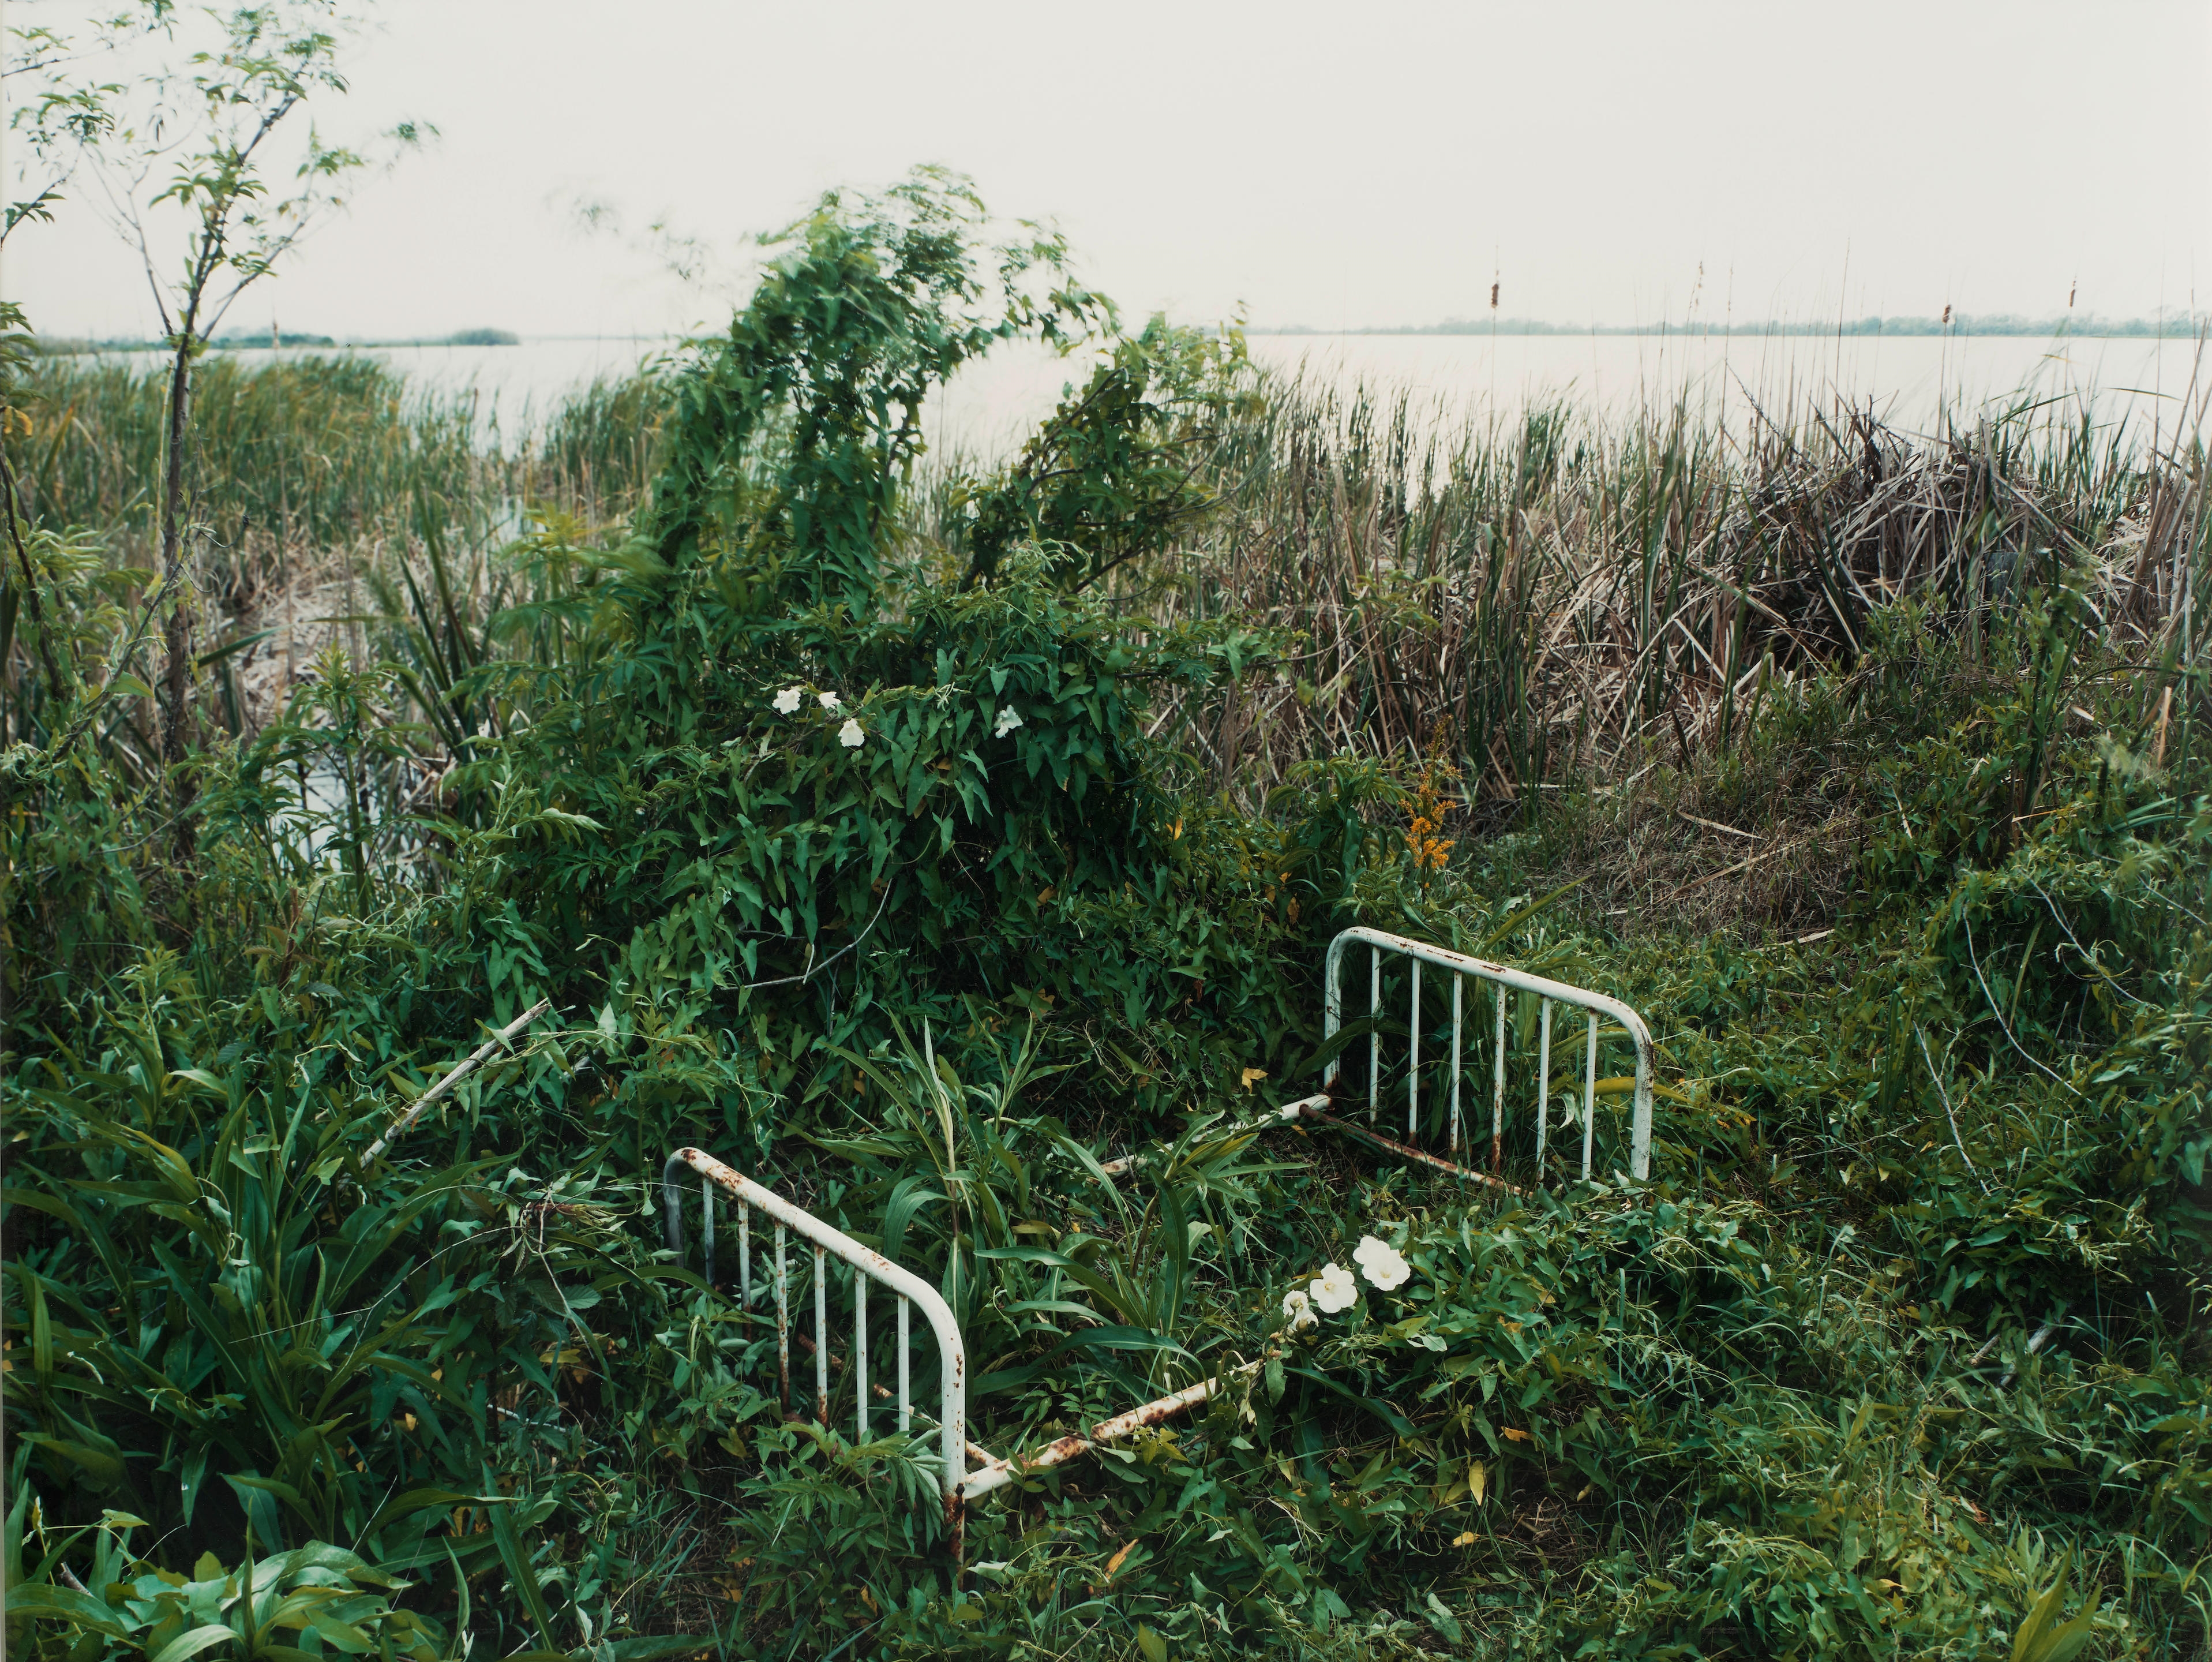 Venice, Louisiana (from 'Sleeping by the Mississippi - Alec Soth